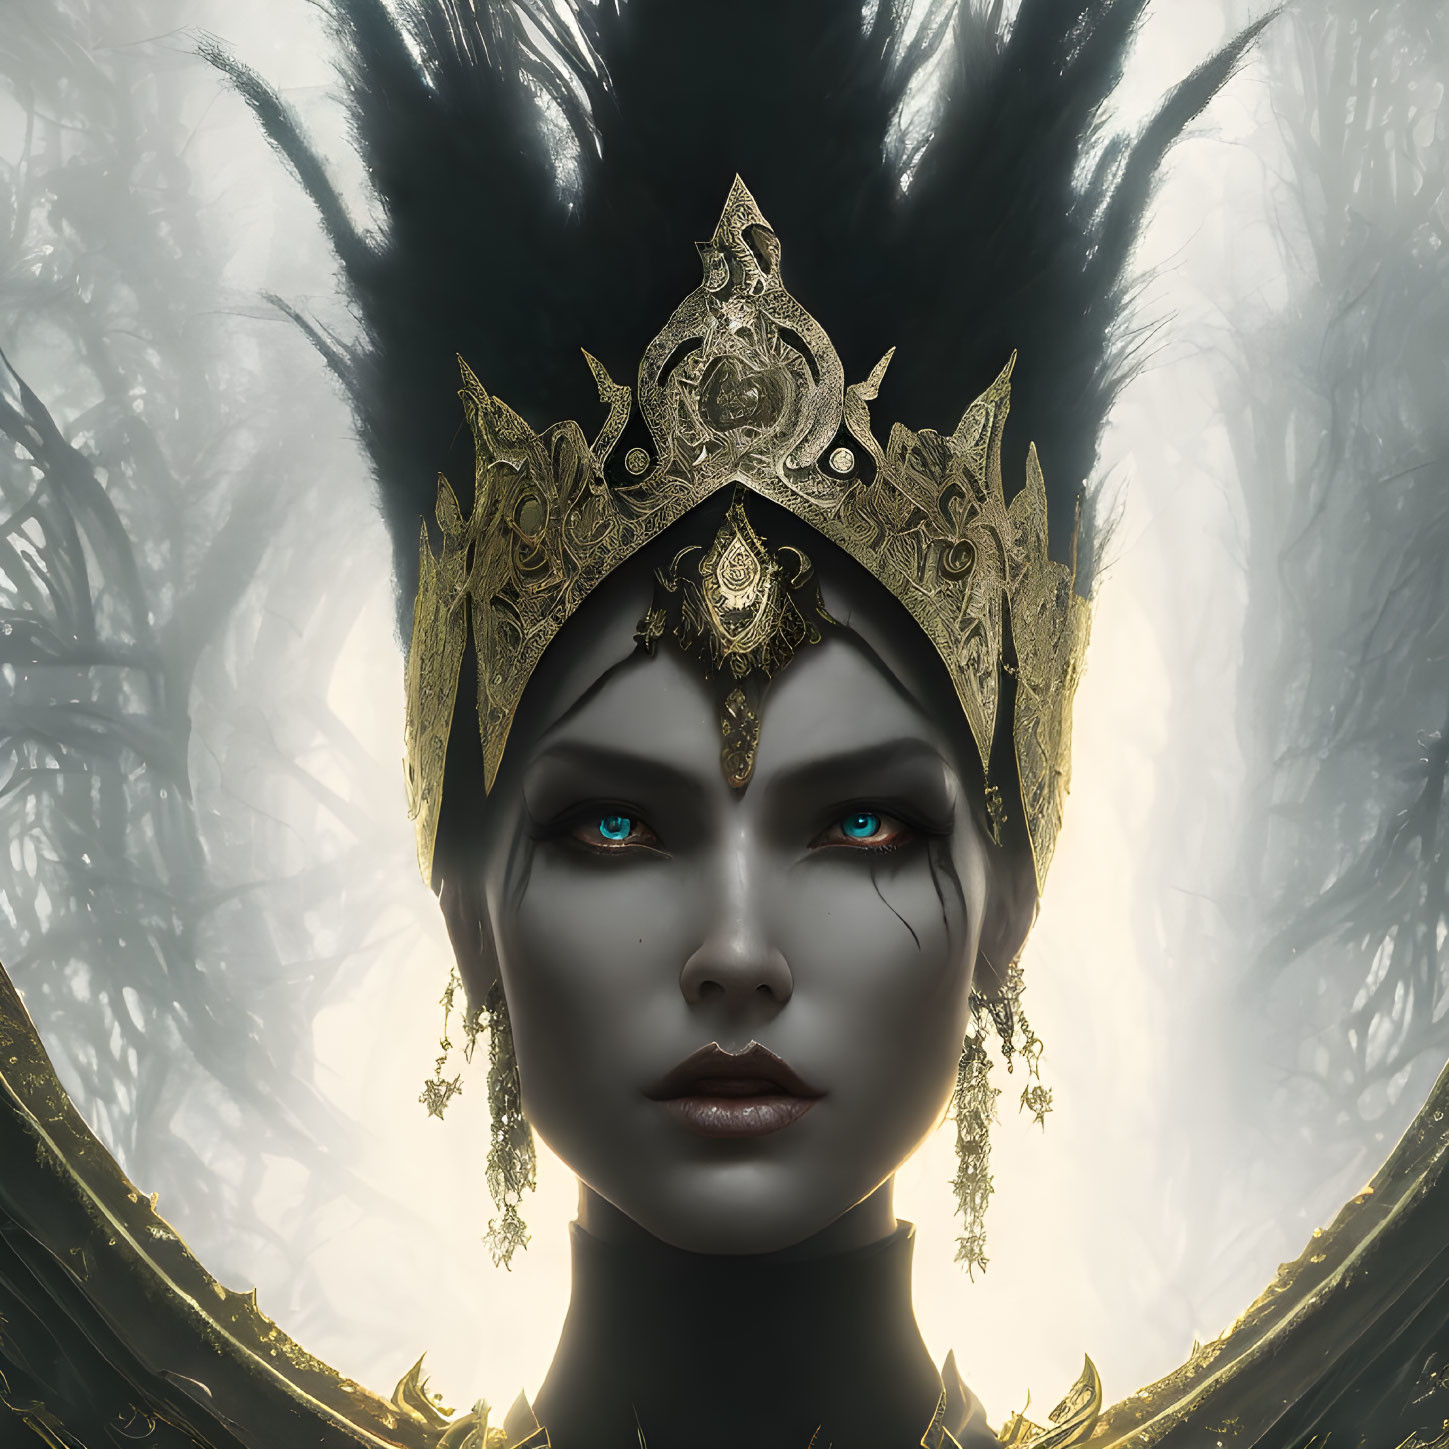 Digital portrait of individual with blue eyes, dark skin, golden crown, and forest backdrop